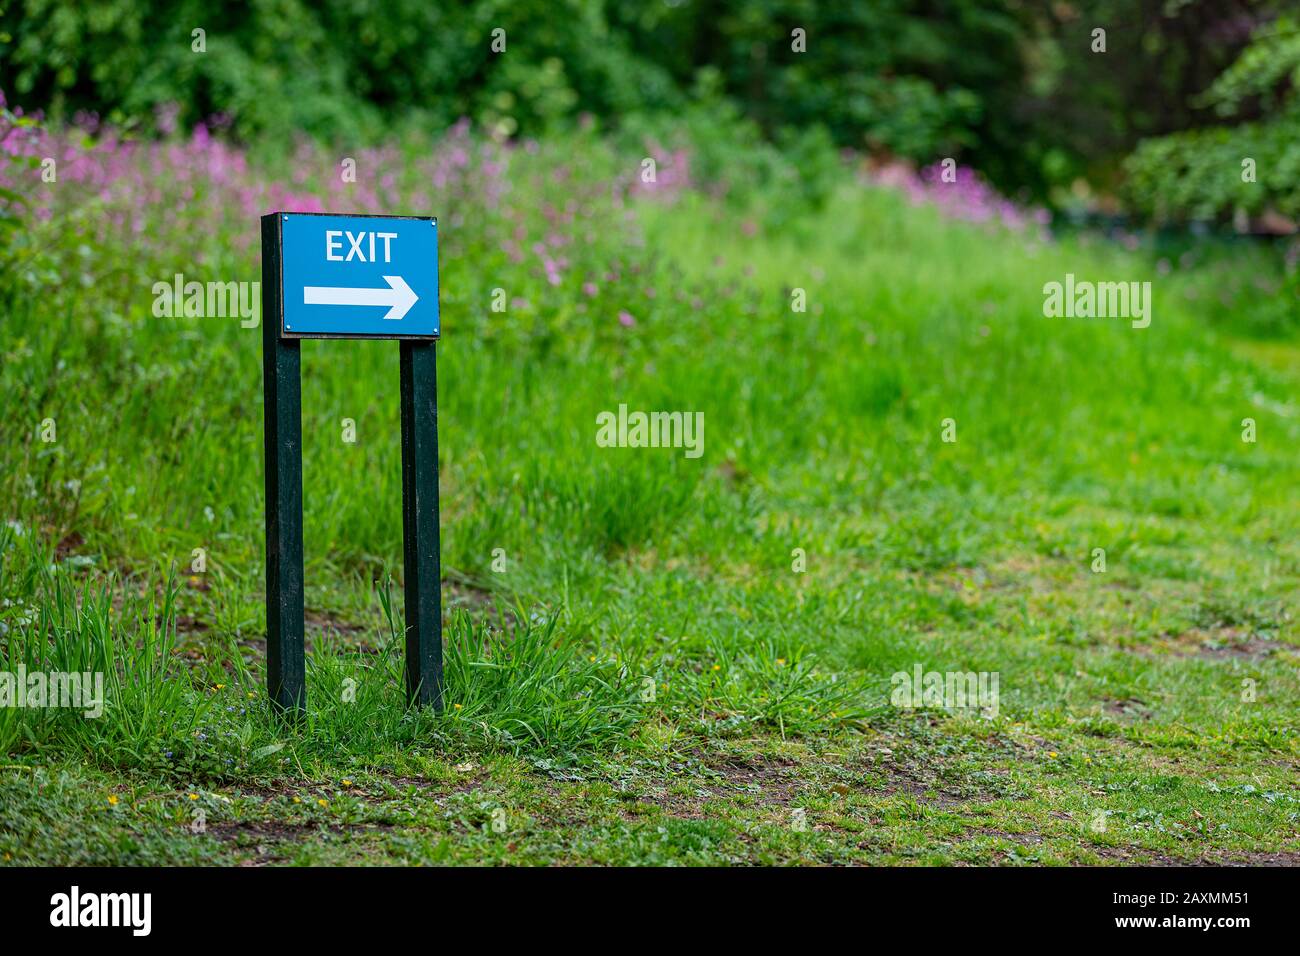 Exit sign taken in Lancashire England during the spring / summer Stock Photo